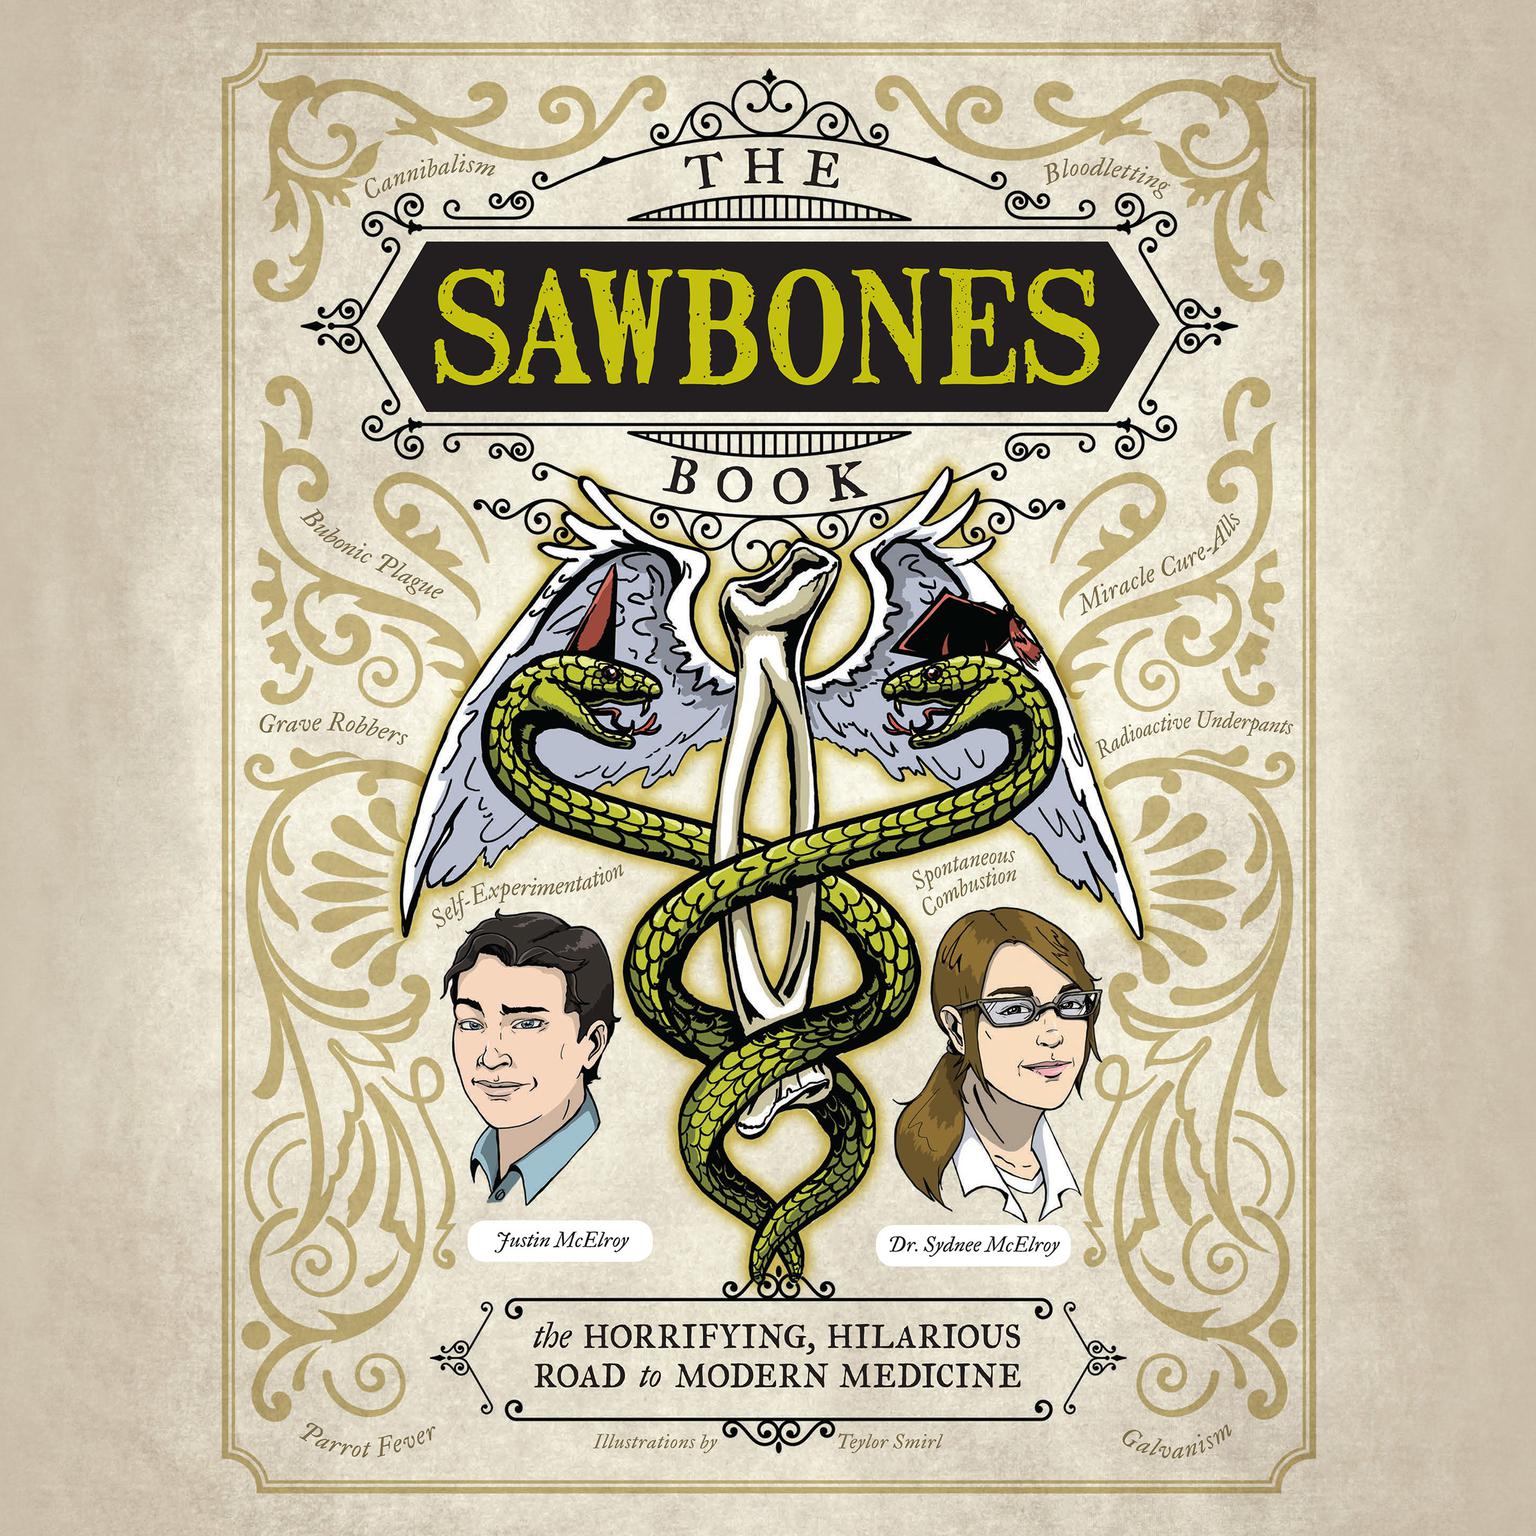 The Sawbones Book: The Horrifying, Hilarious Road to Modern Medicine Audiobook, by Justin McElroy